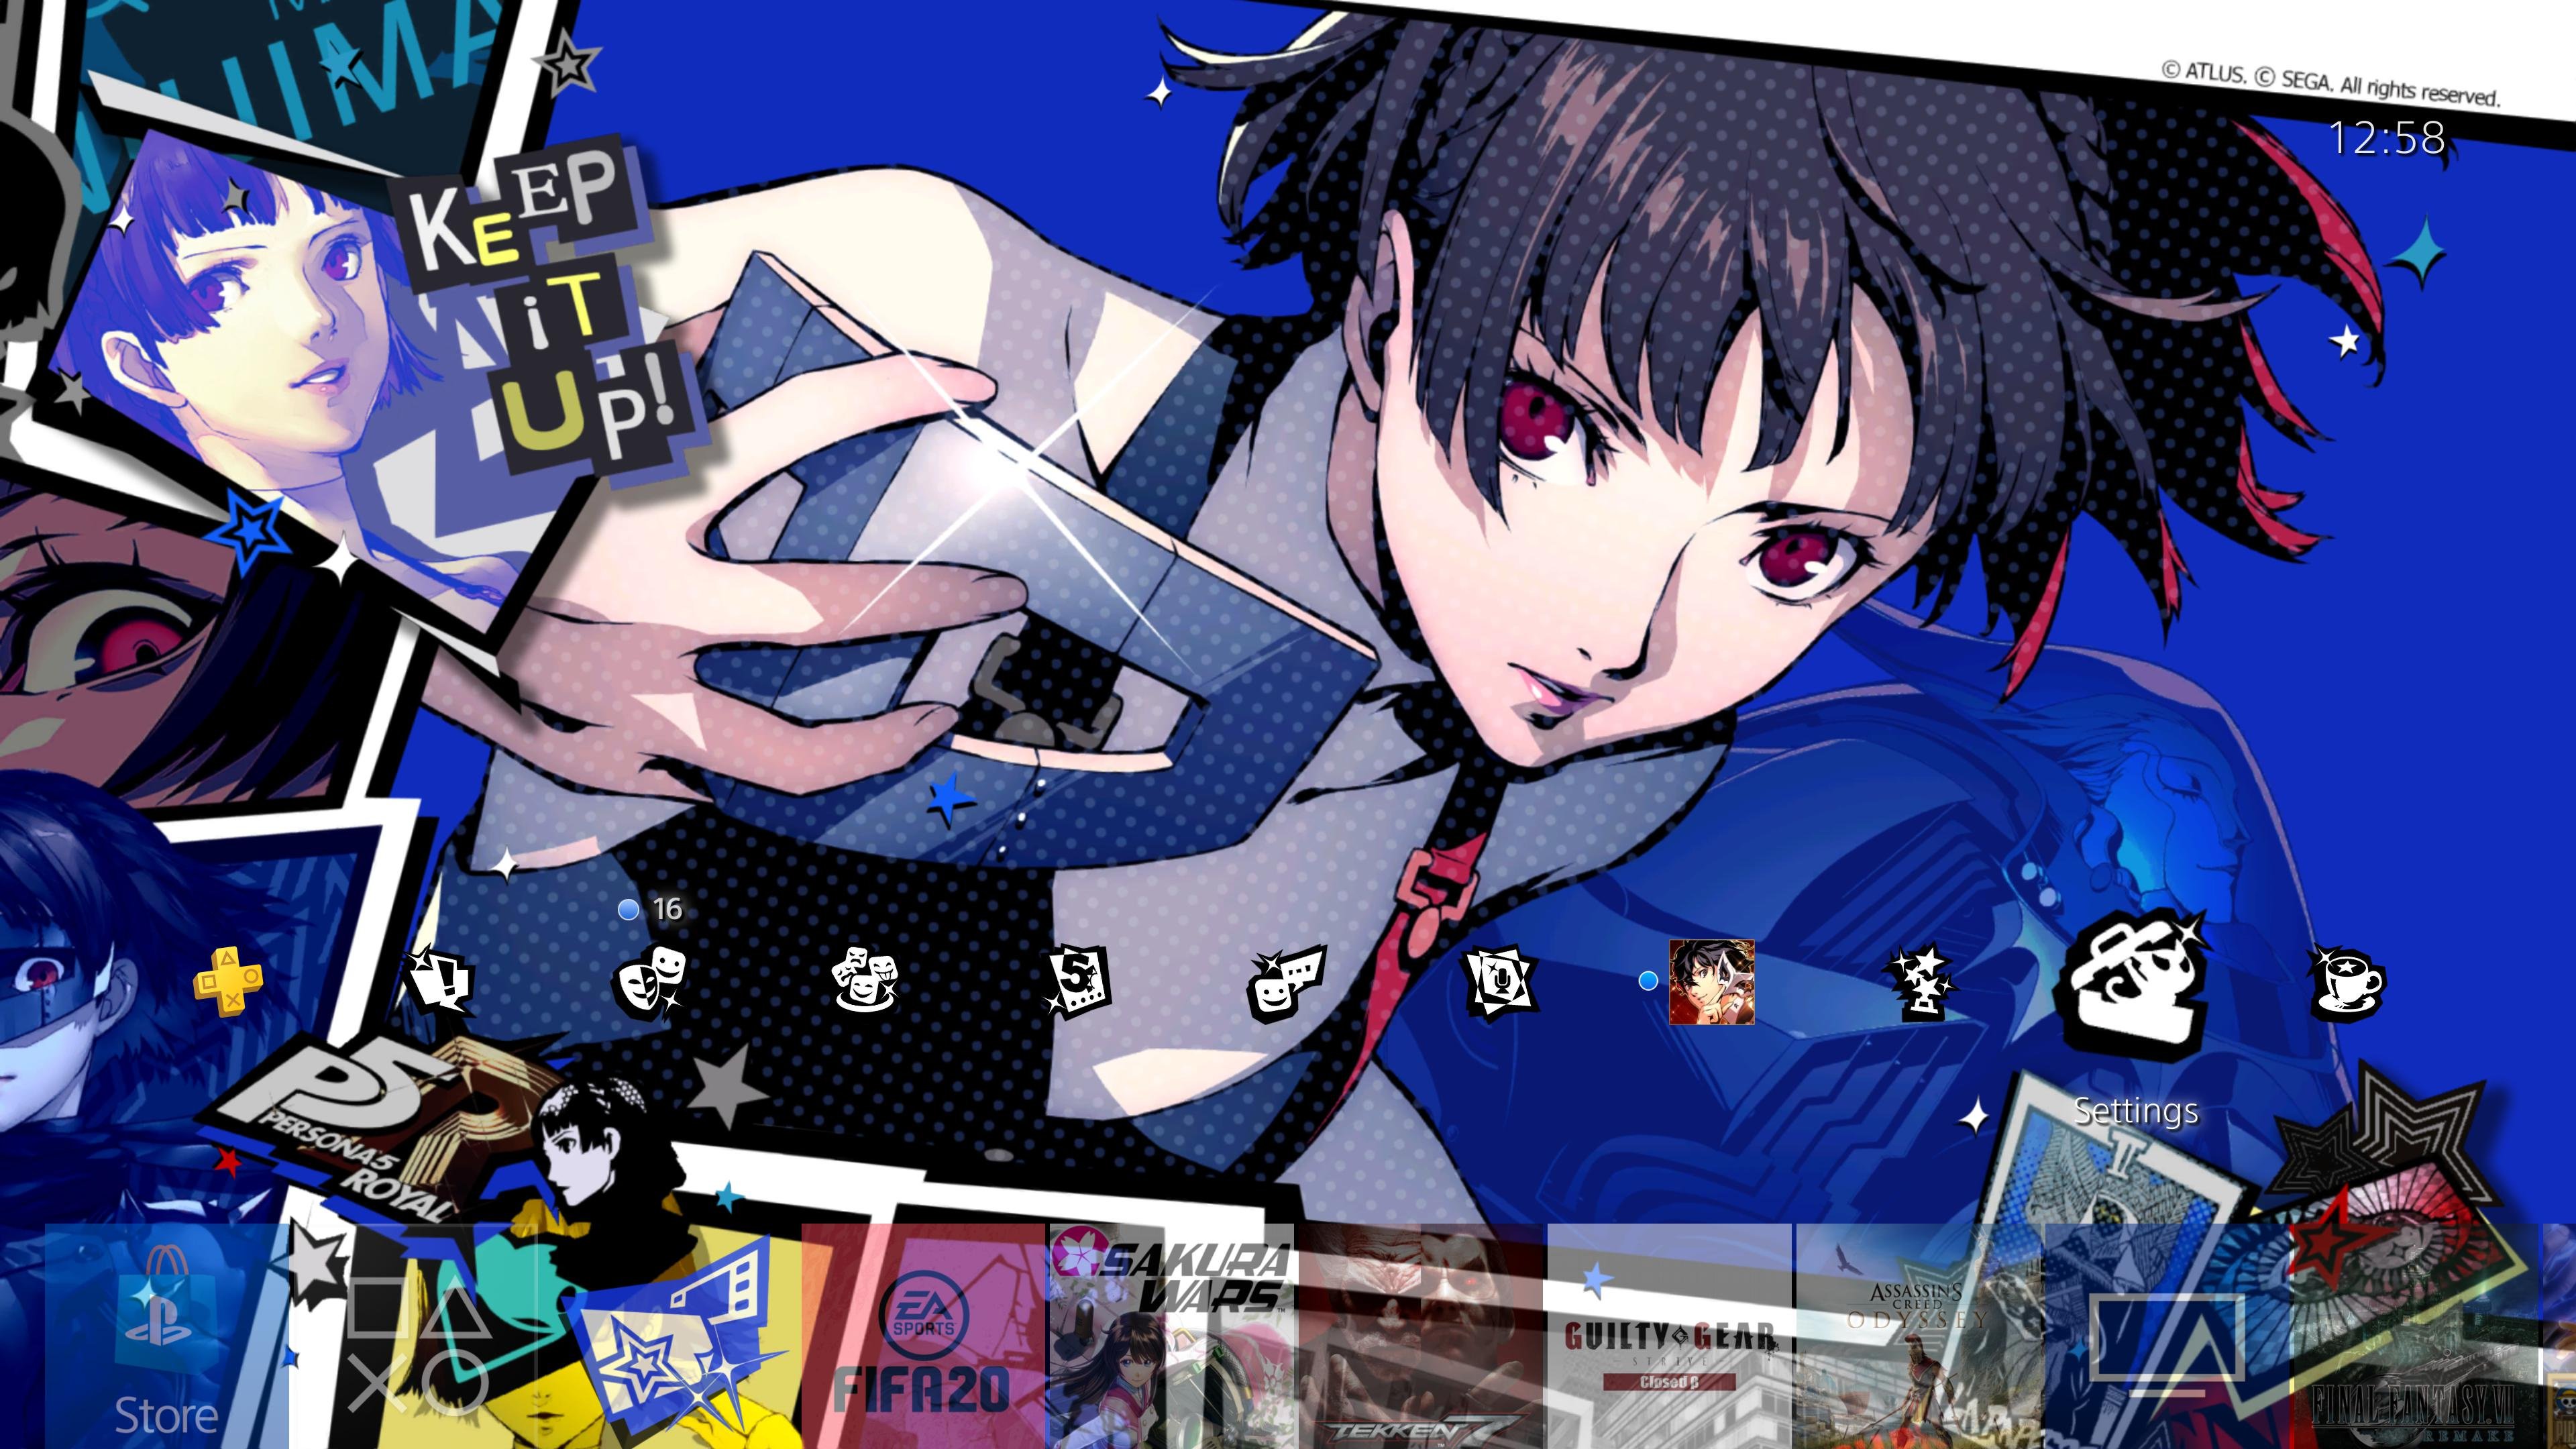 ygopro persona 5 theme download